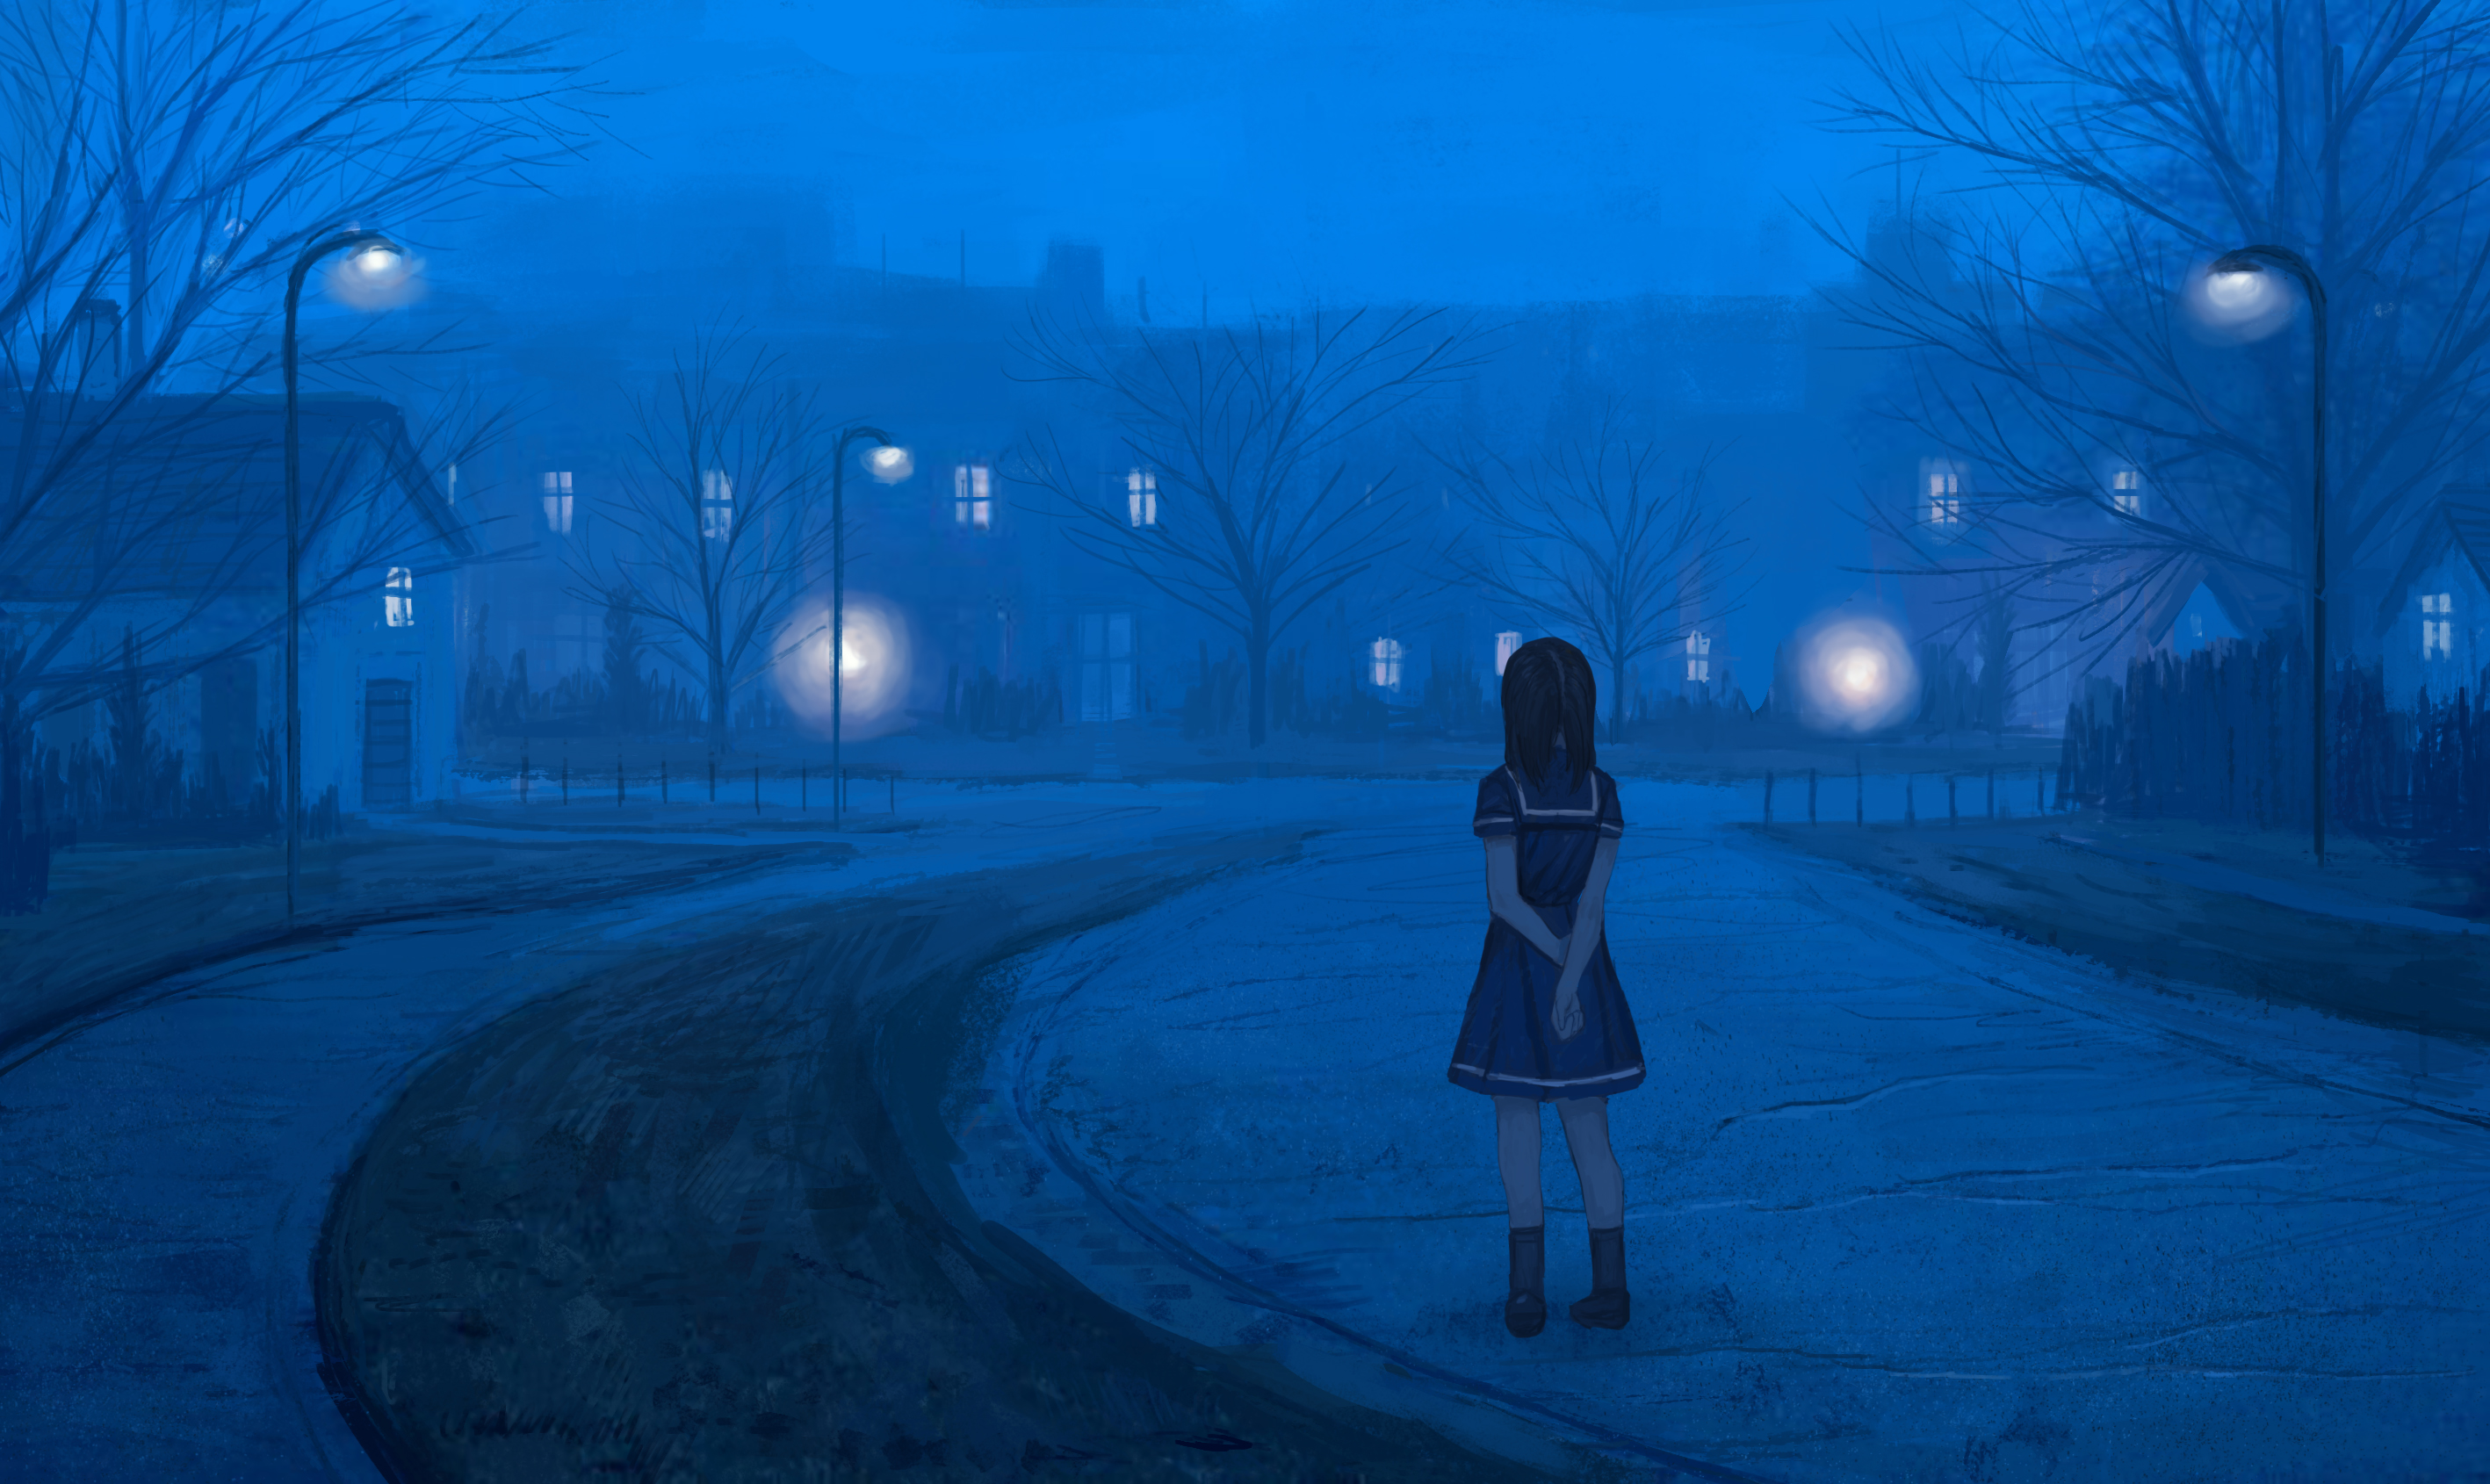 Staring into the Citylights by ふきた